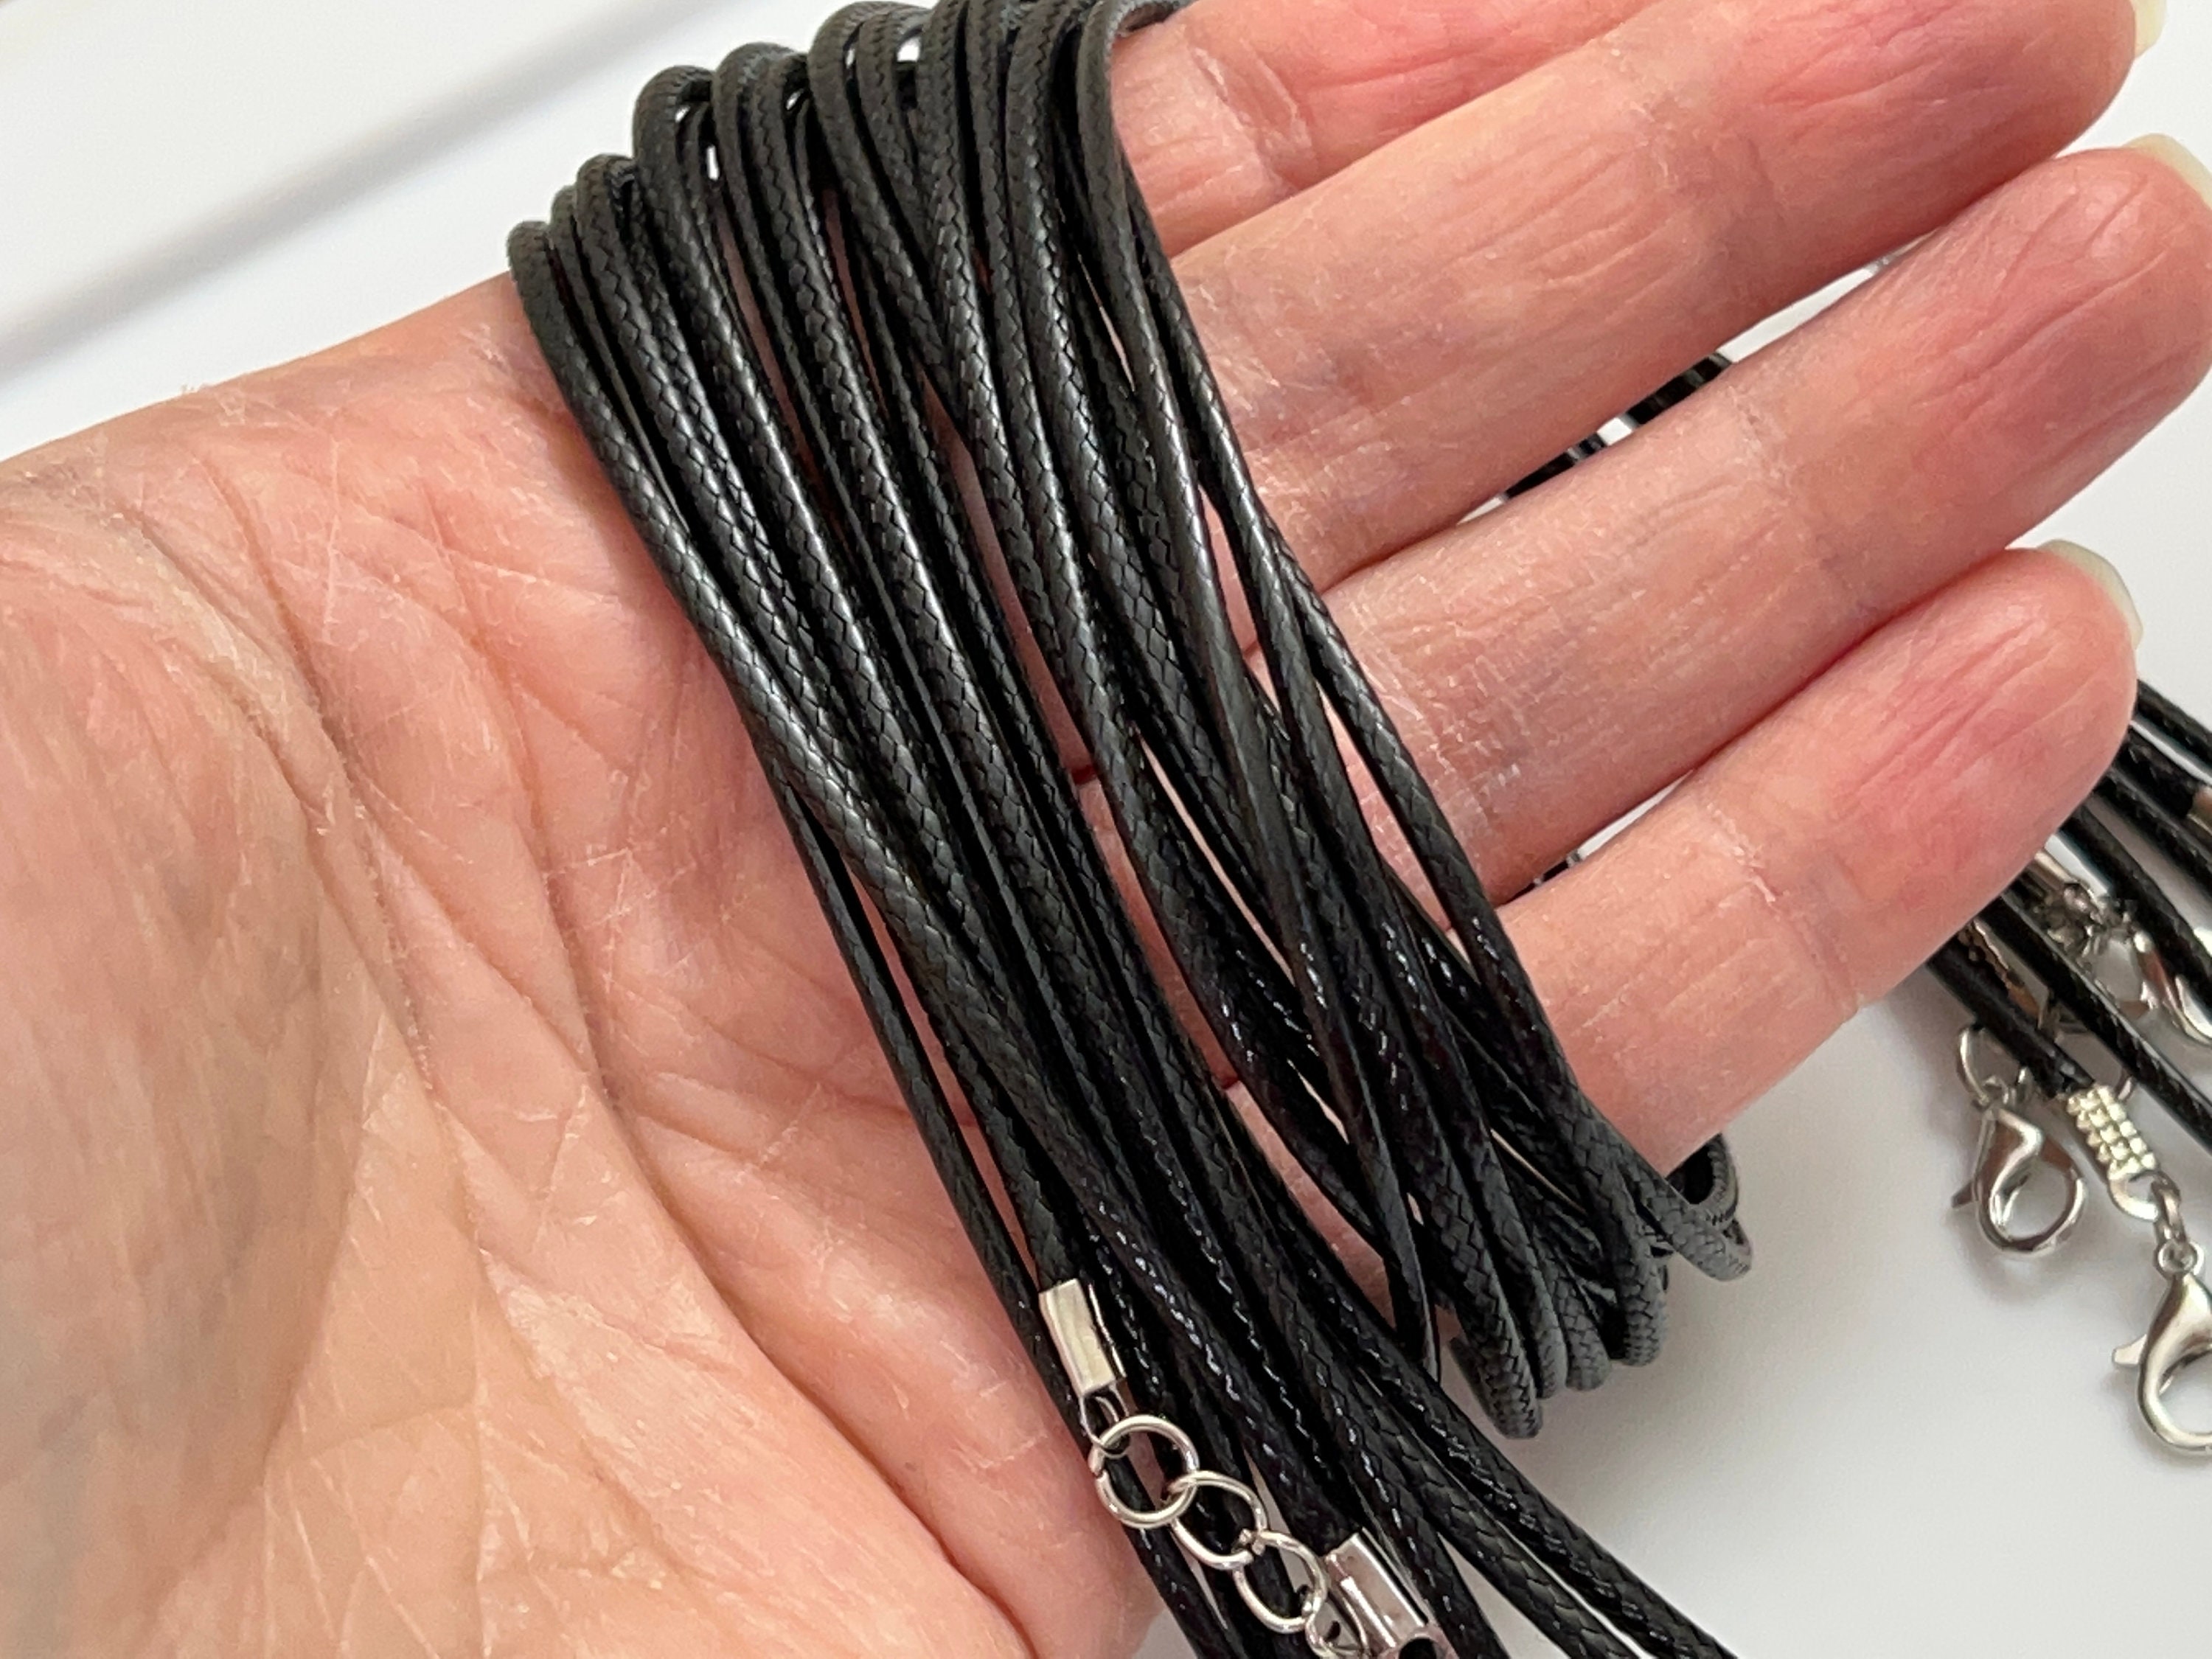  200 Pieces Waxed Necklace Cords with Clasps Bulk Necklace  String Cords for Jewelry Making Pendants DIY Bracelet Supplies (Earth Tone  Color)